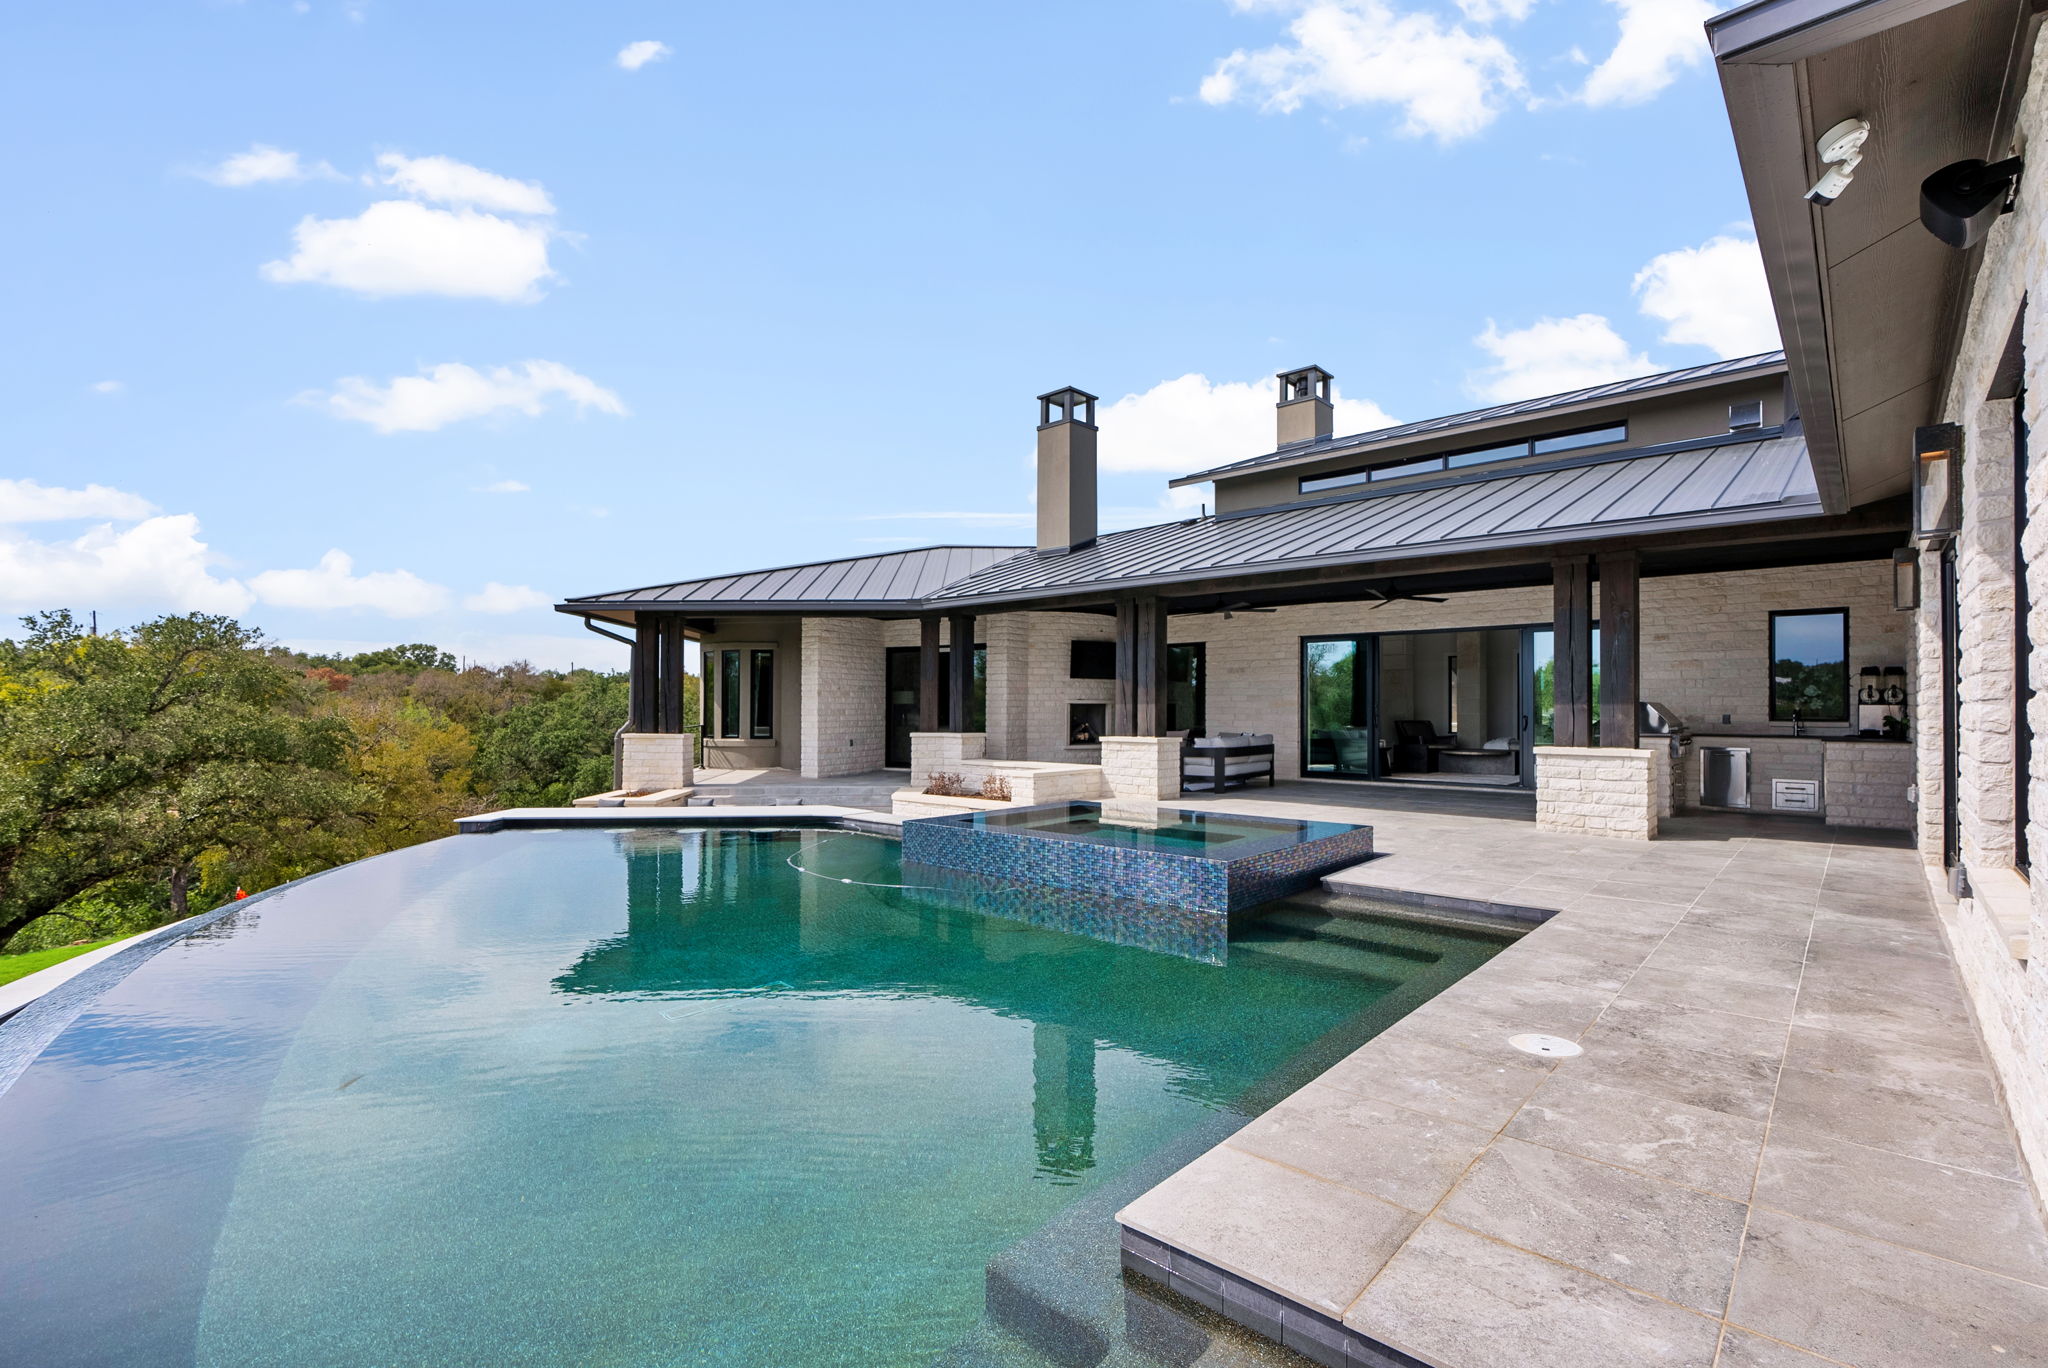 Sustainable design: Energy-efficient home in Austin, TX